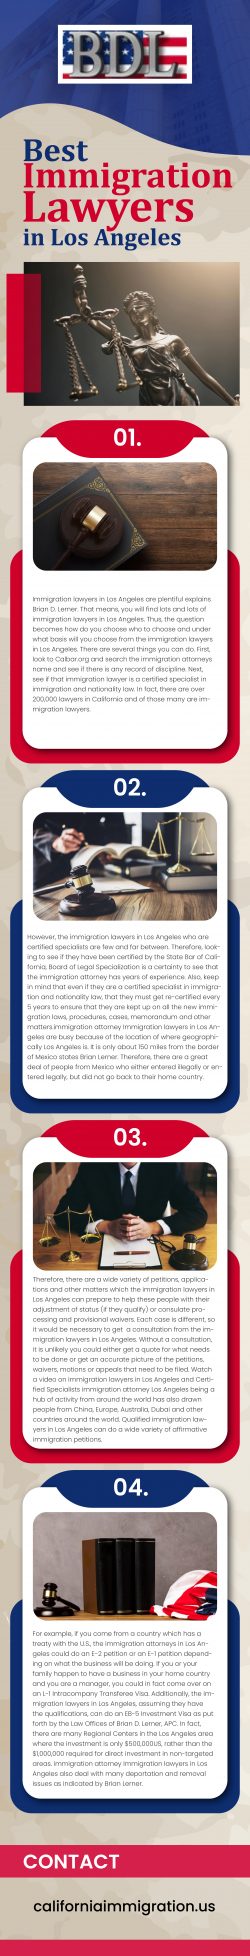 Best immigration lawyers in los angeles at Brian D Lerner